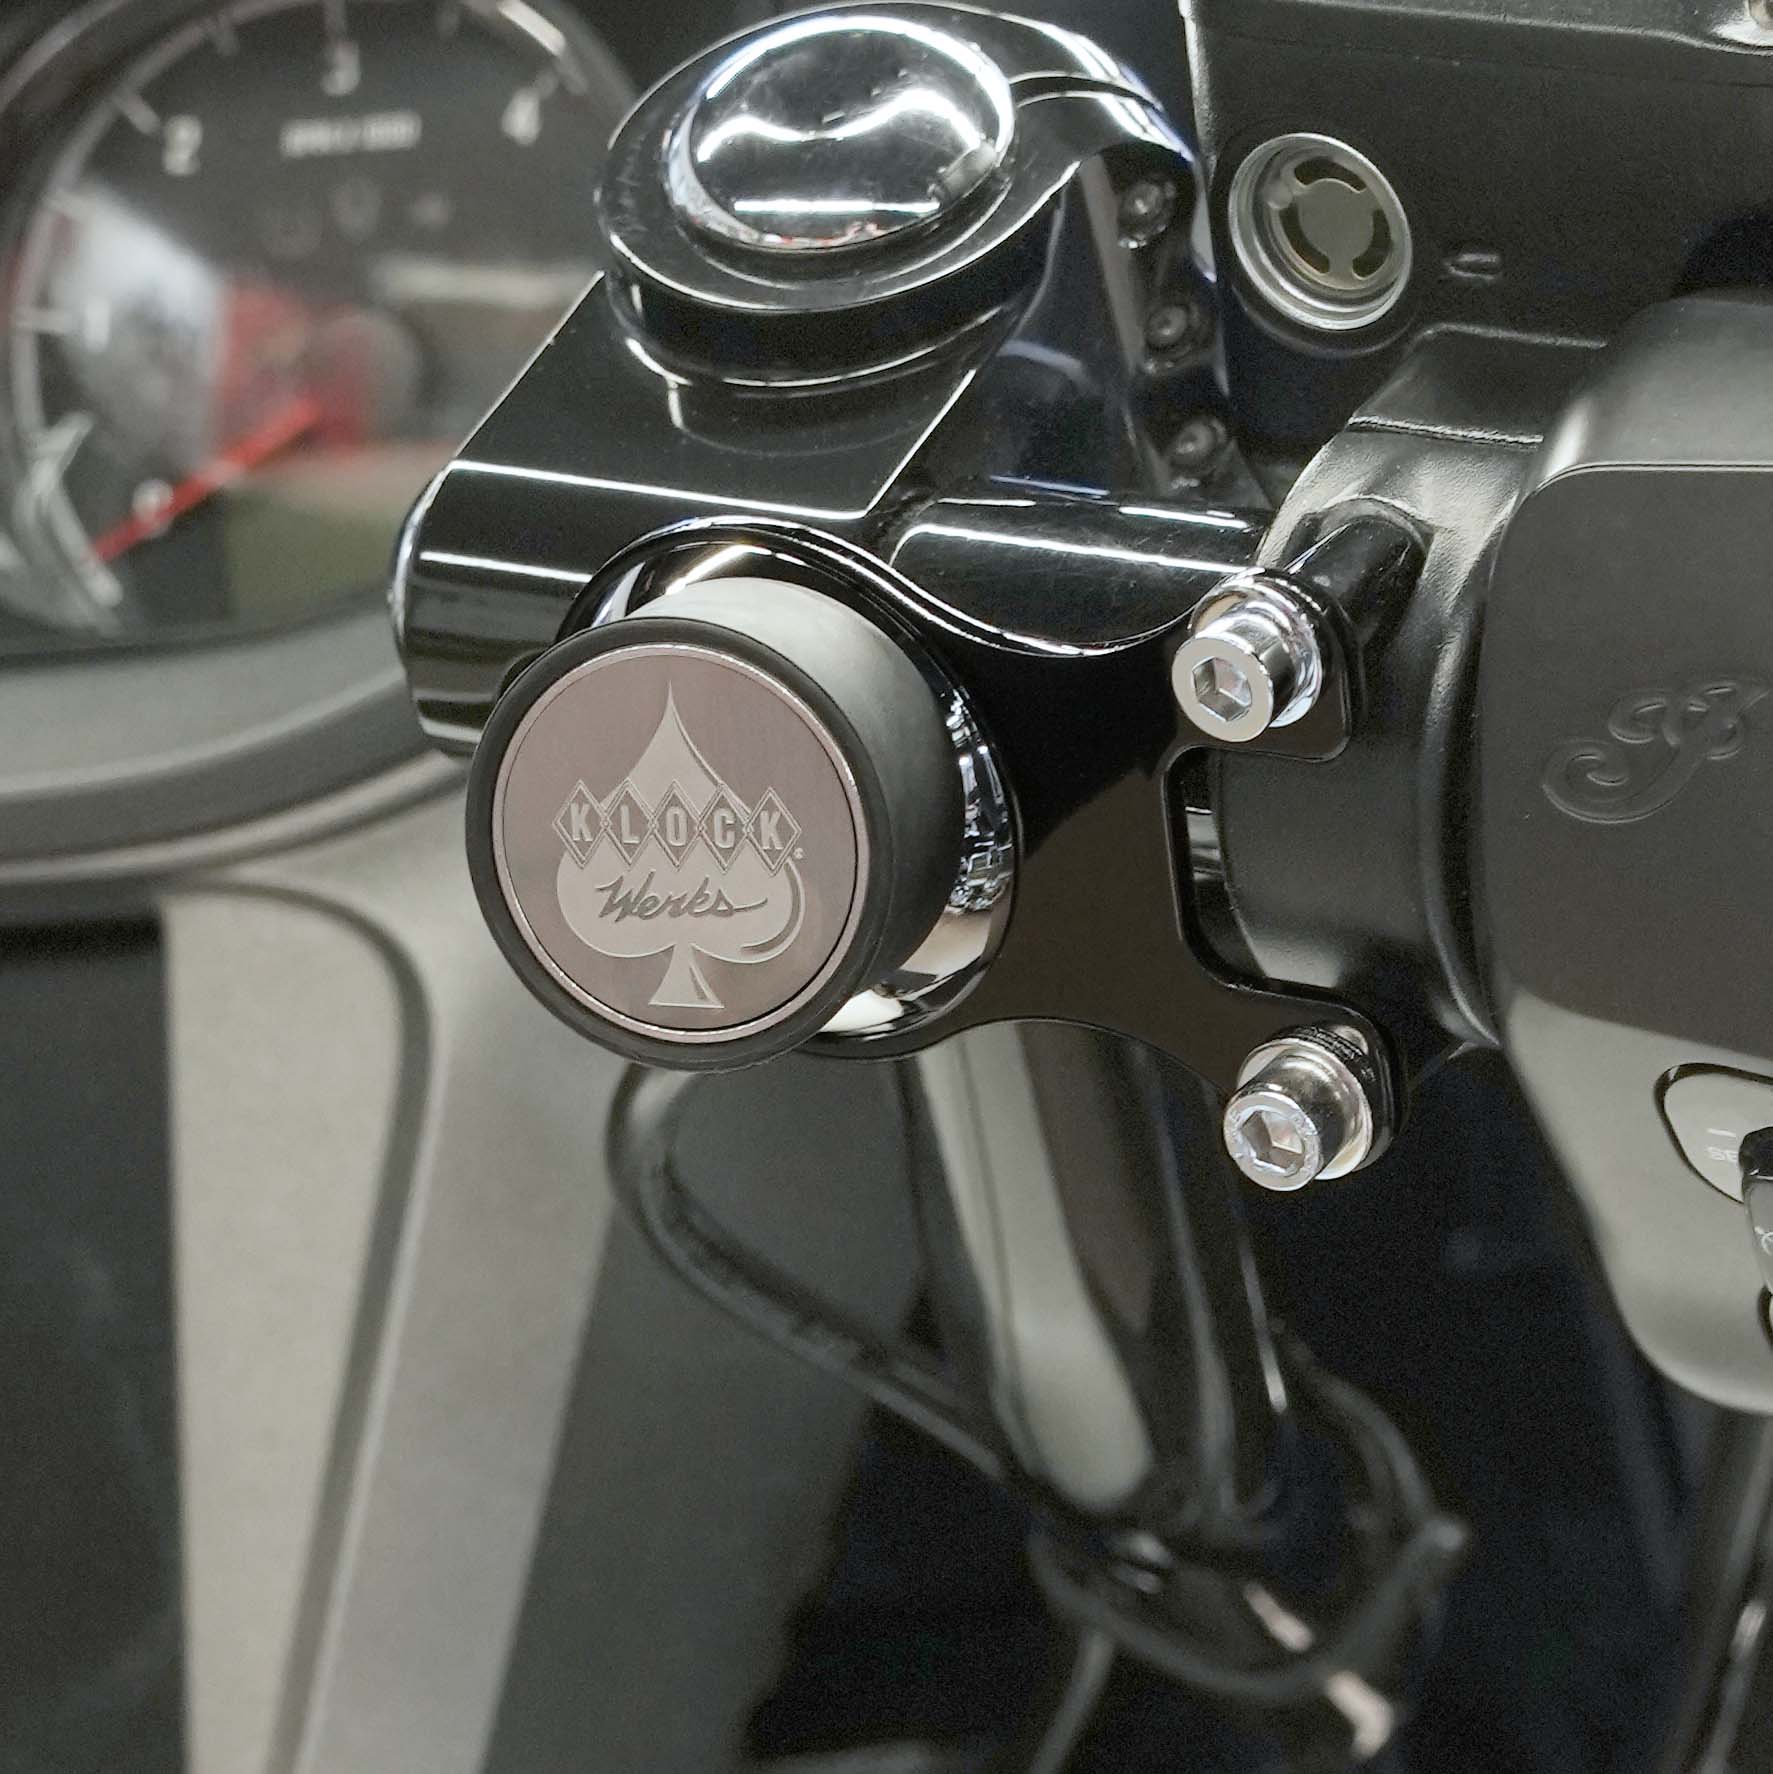 Black Ambidextrous Handlebar Magnetic Phone Mount for Indian® Challenger and Pursuit Motorcycles shown on bike